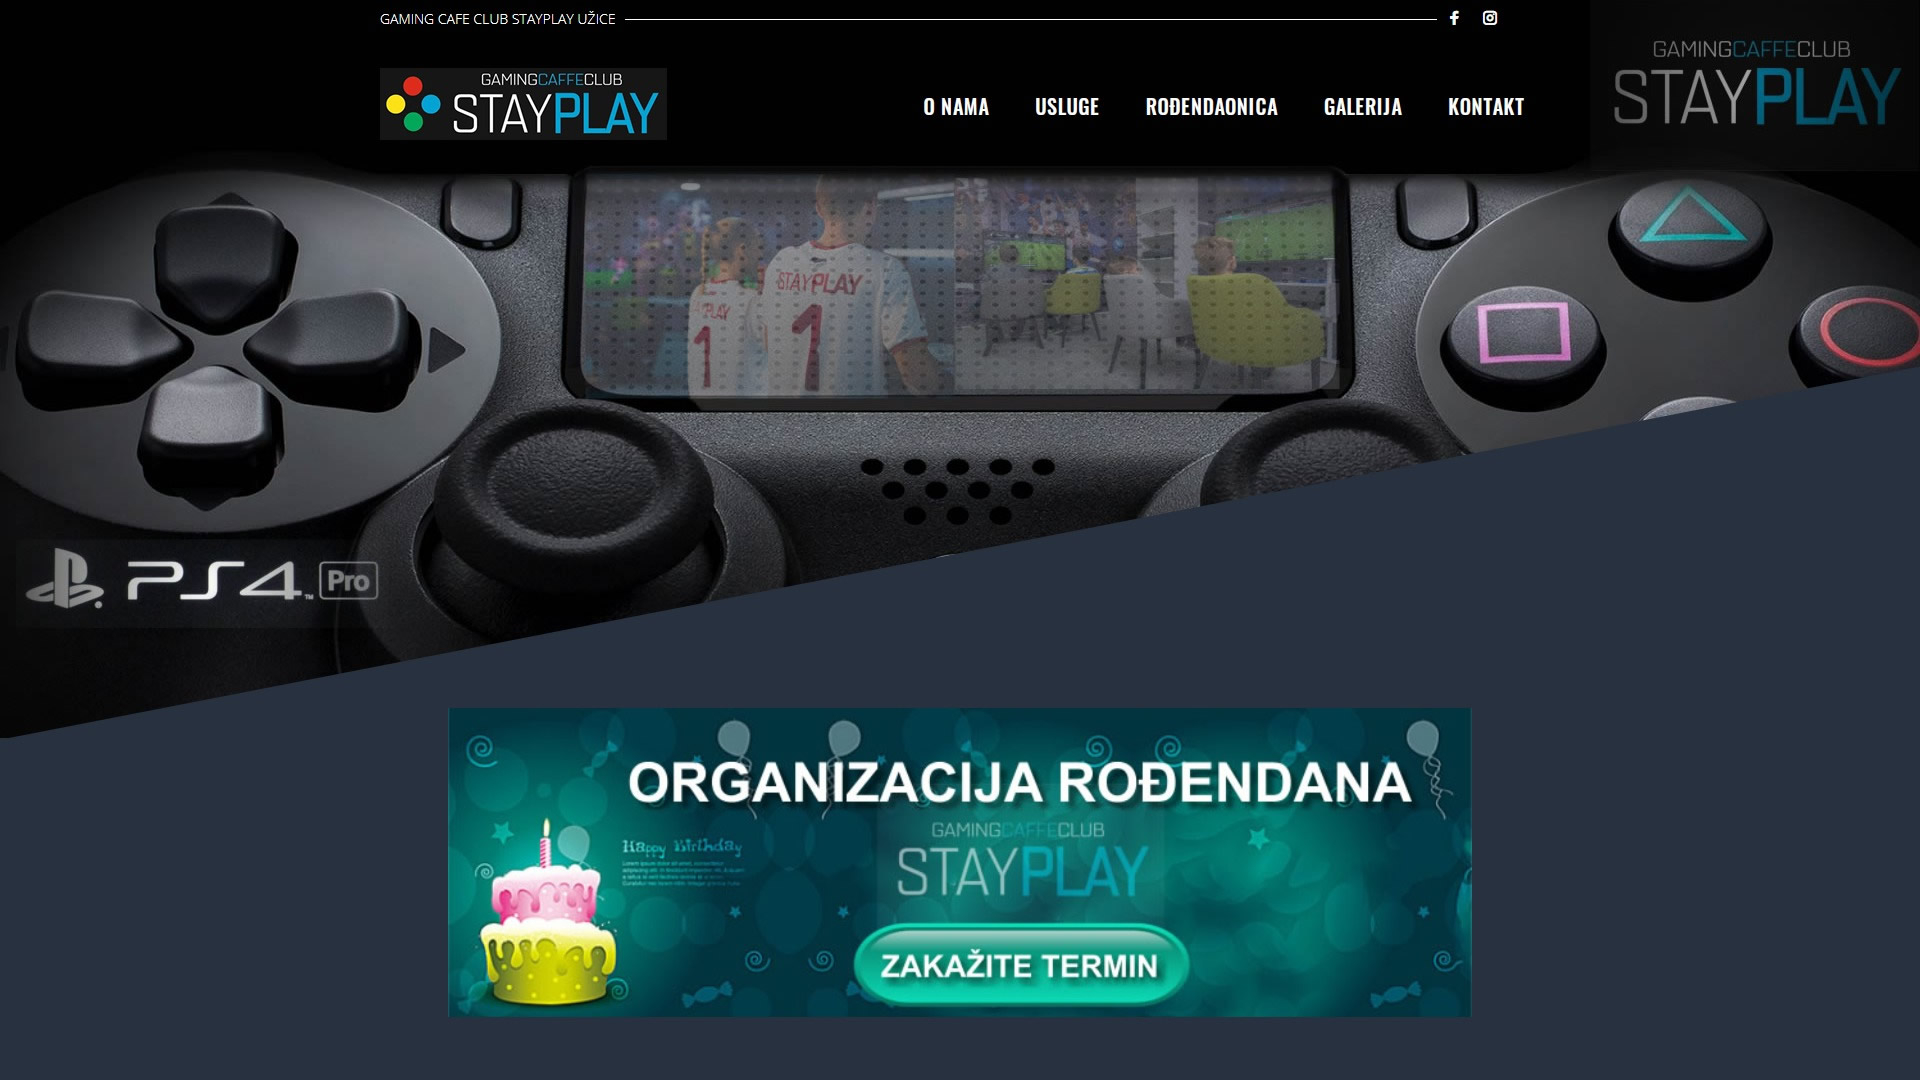 STAY PLAY